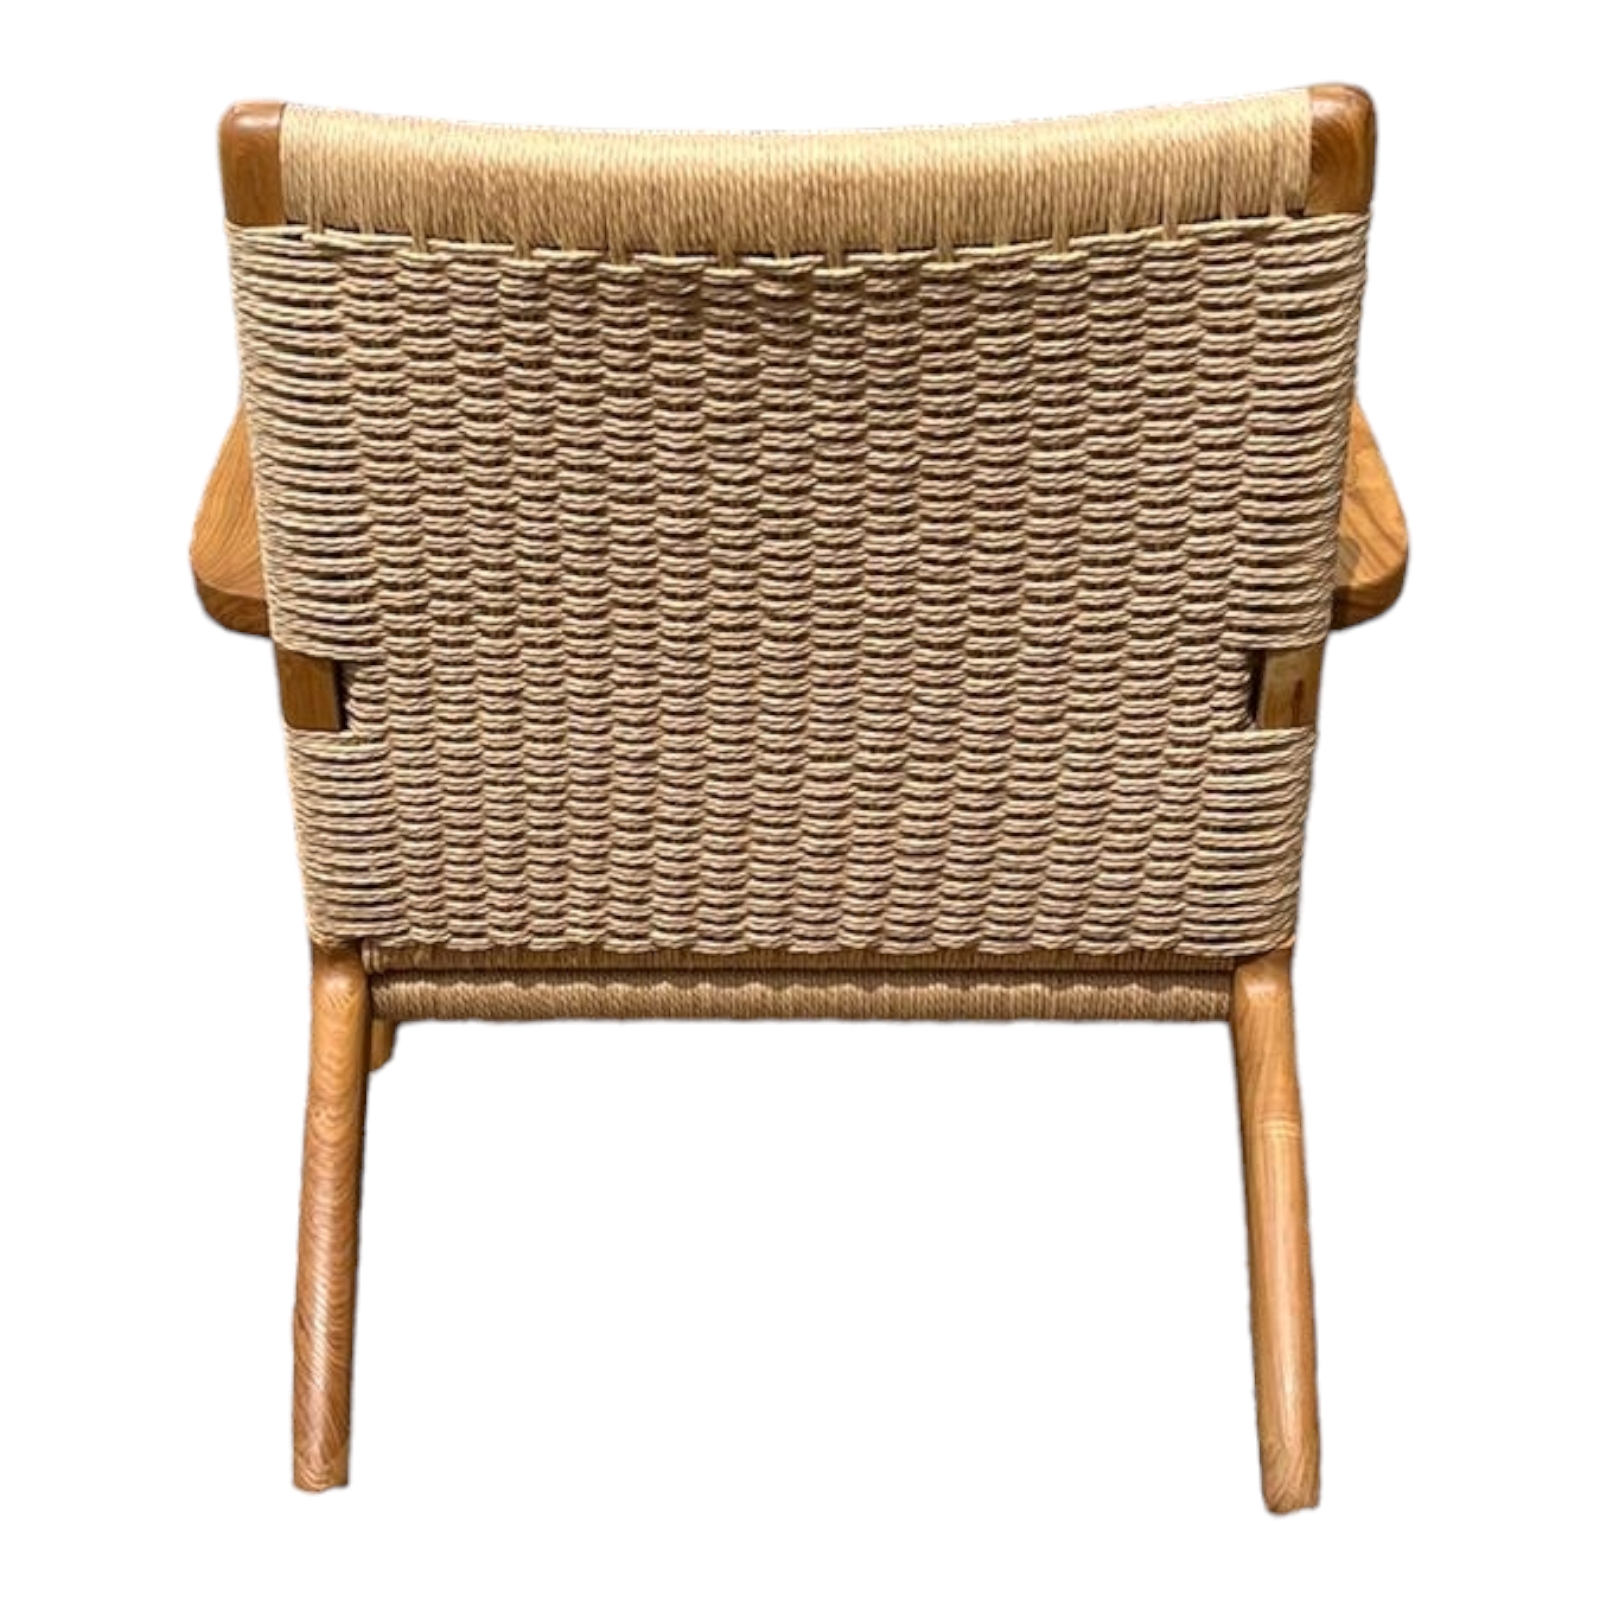 GETAMA, HANS J. WAGNER, DANISH, AN OAK OPEN EASY ARMCHAIR With caned seat and back. (70cm x 70cm x - Image 3 of 3